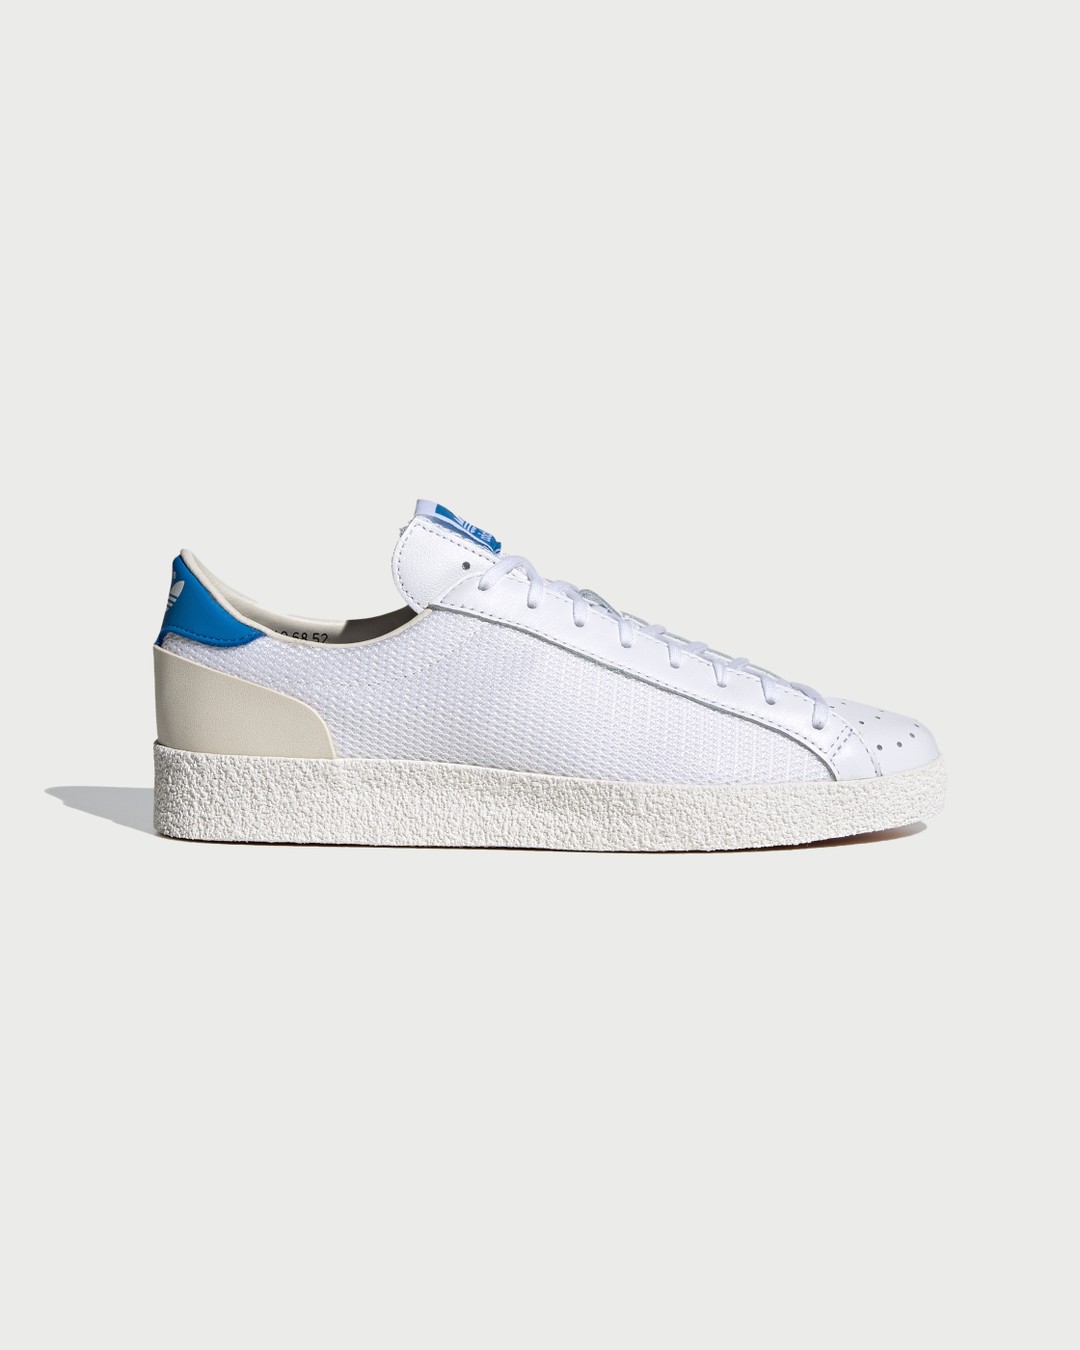 Adidas – Aderley Spezial Off White - Low Top Sneakers - White - Image 1